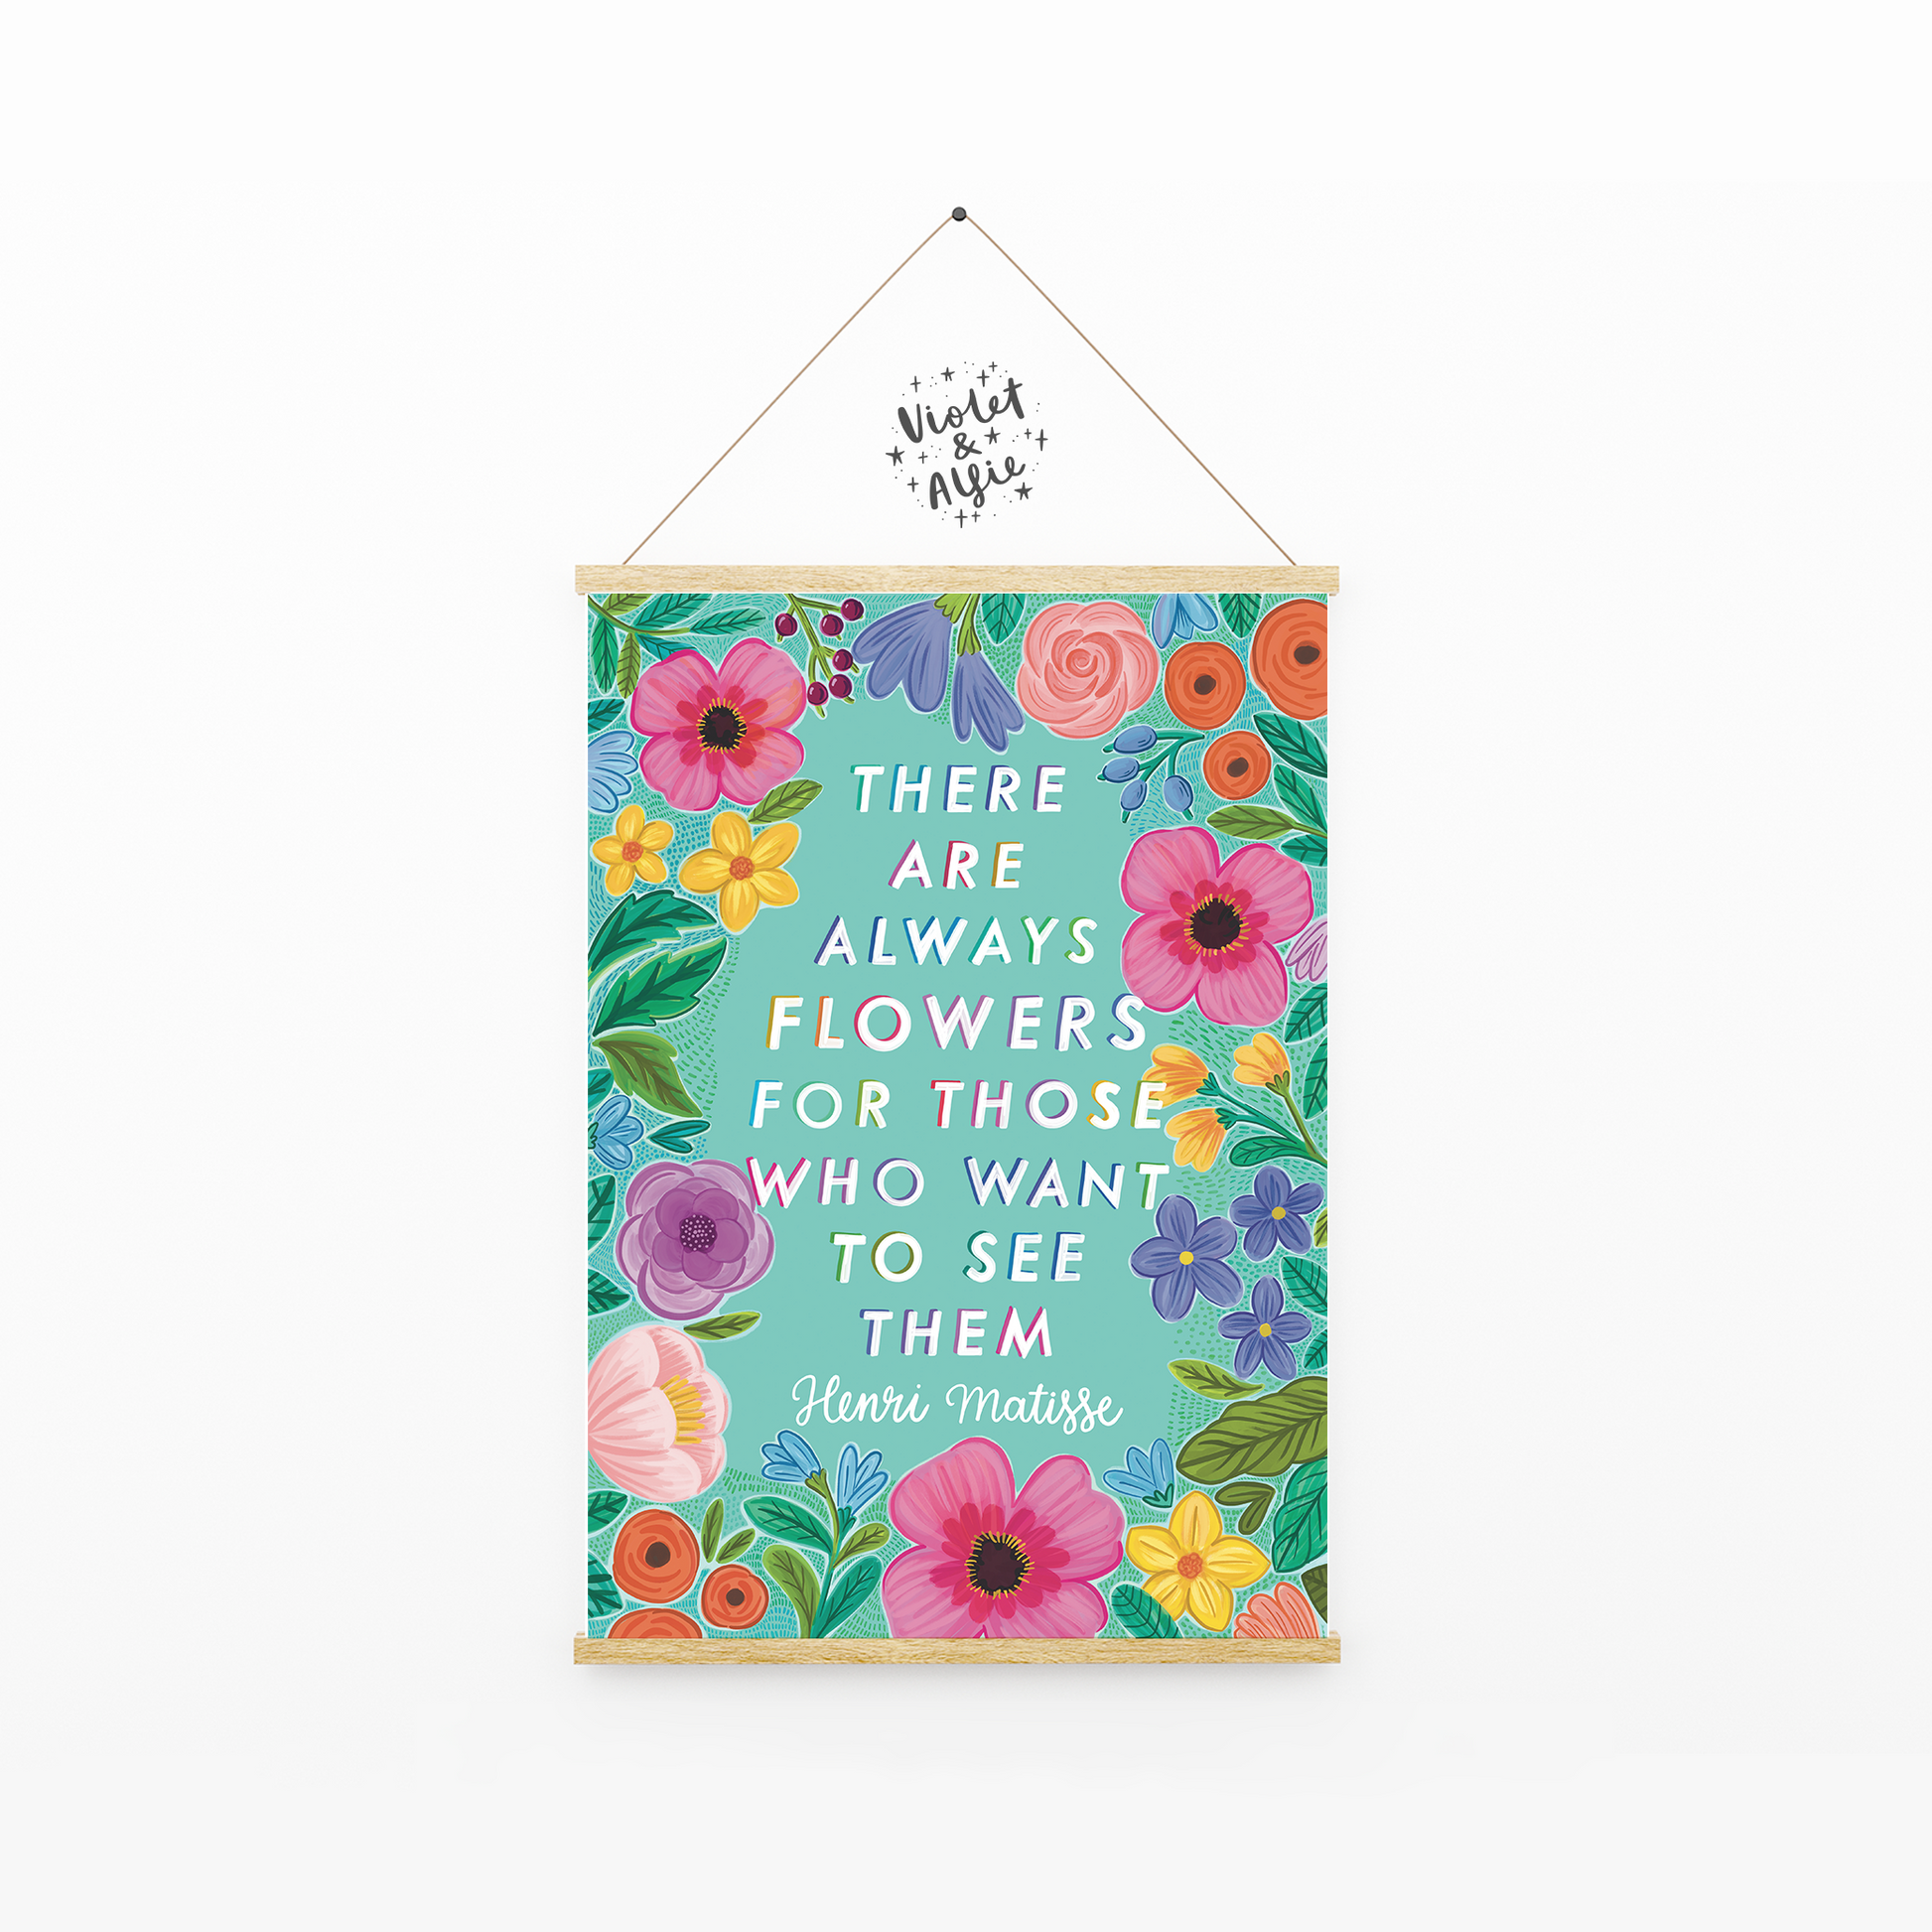 Henri Matisse Quote, there are always flowers for those who wish to see them, flower illustration art, floral wall decor, botanical wall prints, prints for mum, prints for kitchen, colourful wall art, maximalist home decor accessories